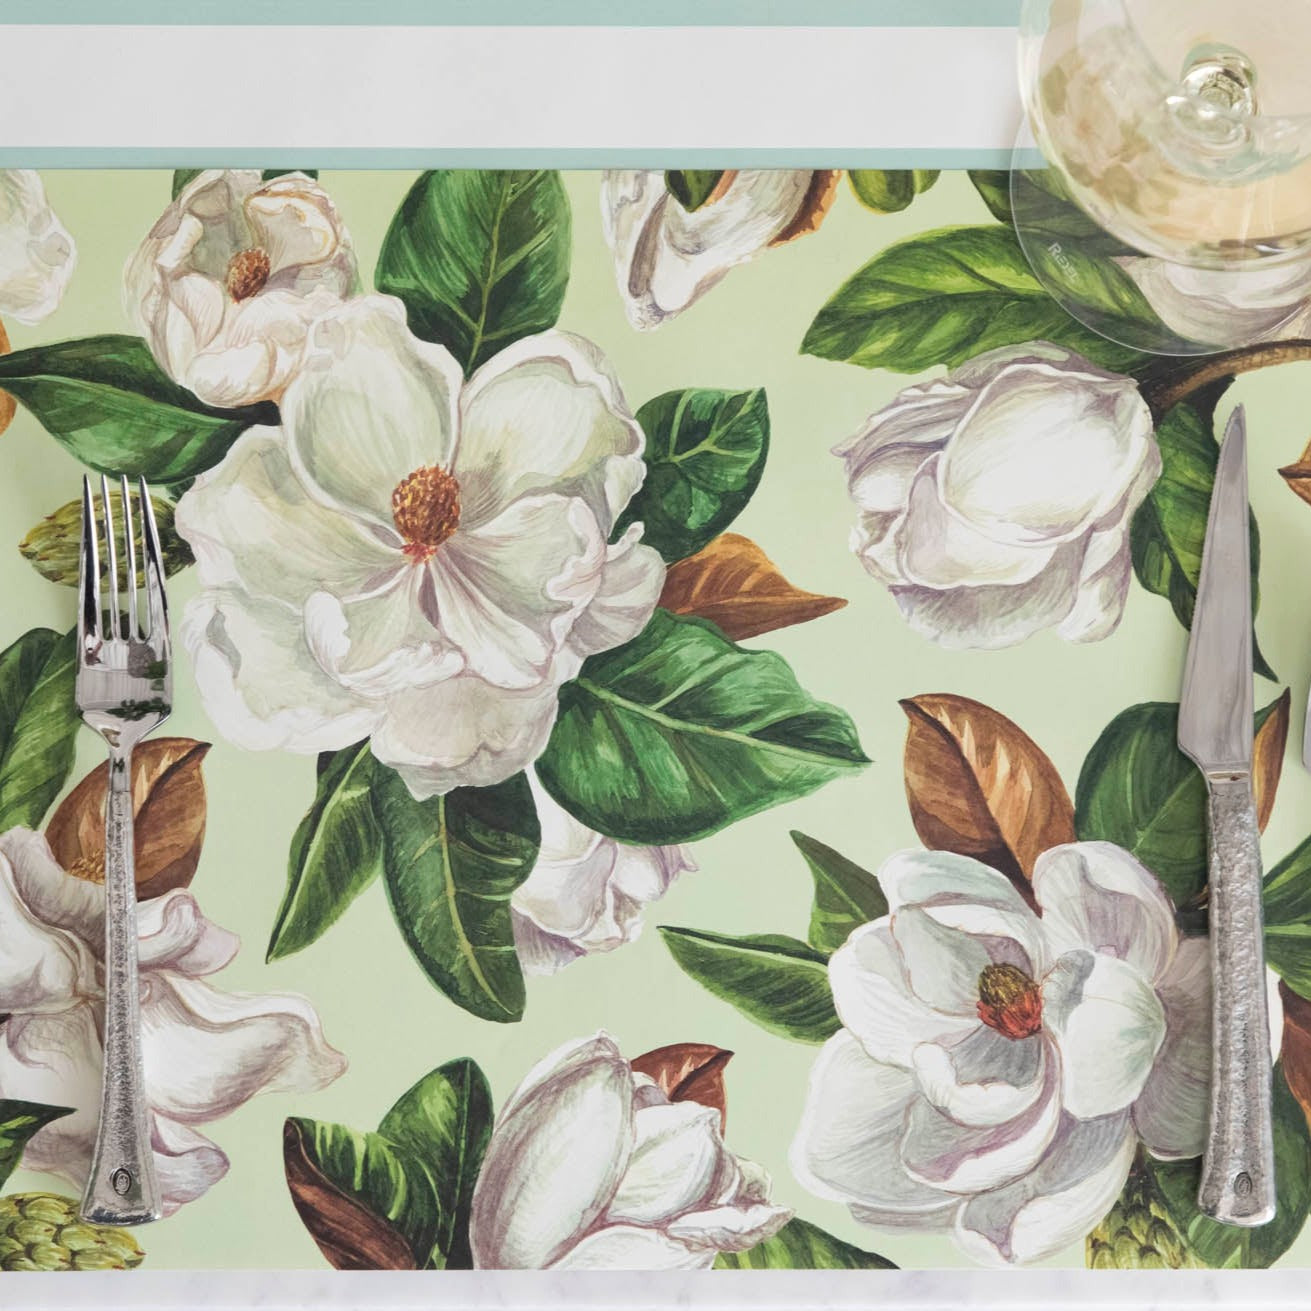 The Mint Magnolia Blooms Placemat under an elegant place setting, from above.